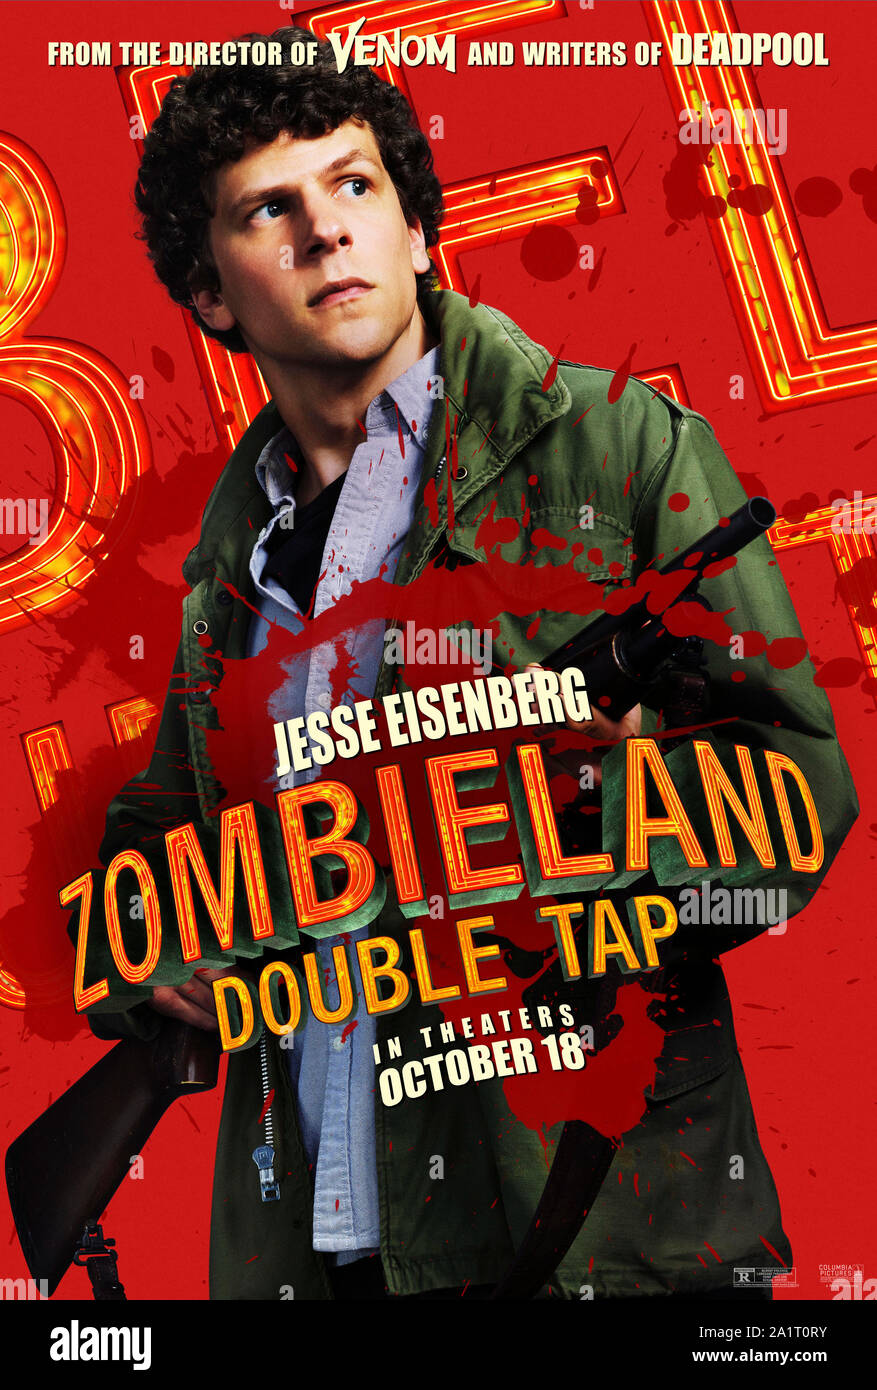 RELEASE DATE: October 18, 2019 TITLE: Zombieland 2: Double Tap STUDIO: Colombia Pictures DIRECTOR: Ruben Fleischer PLOT: Columbus, Tallahasse, Wichita, and Little Rock move to the American heartland as they face off against evolved zombies, fellow survivors, and the growing pains of the snarky makeshift family. STARRING: JESSE EISENBERG as Columbus. (Credit Image: © Colombia Pictures/Entertainment Pictures) Stock Photo